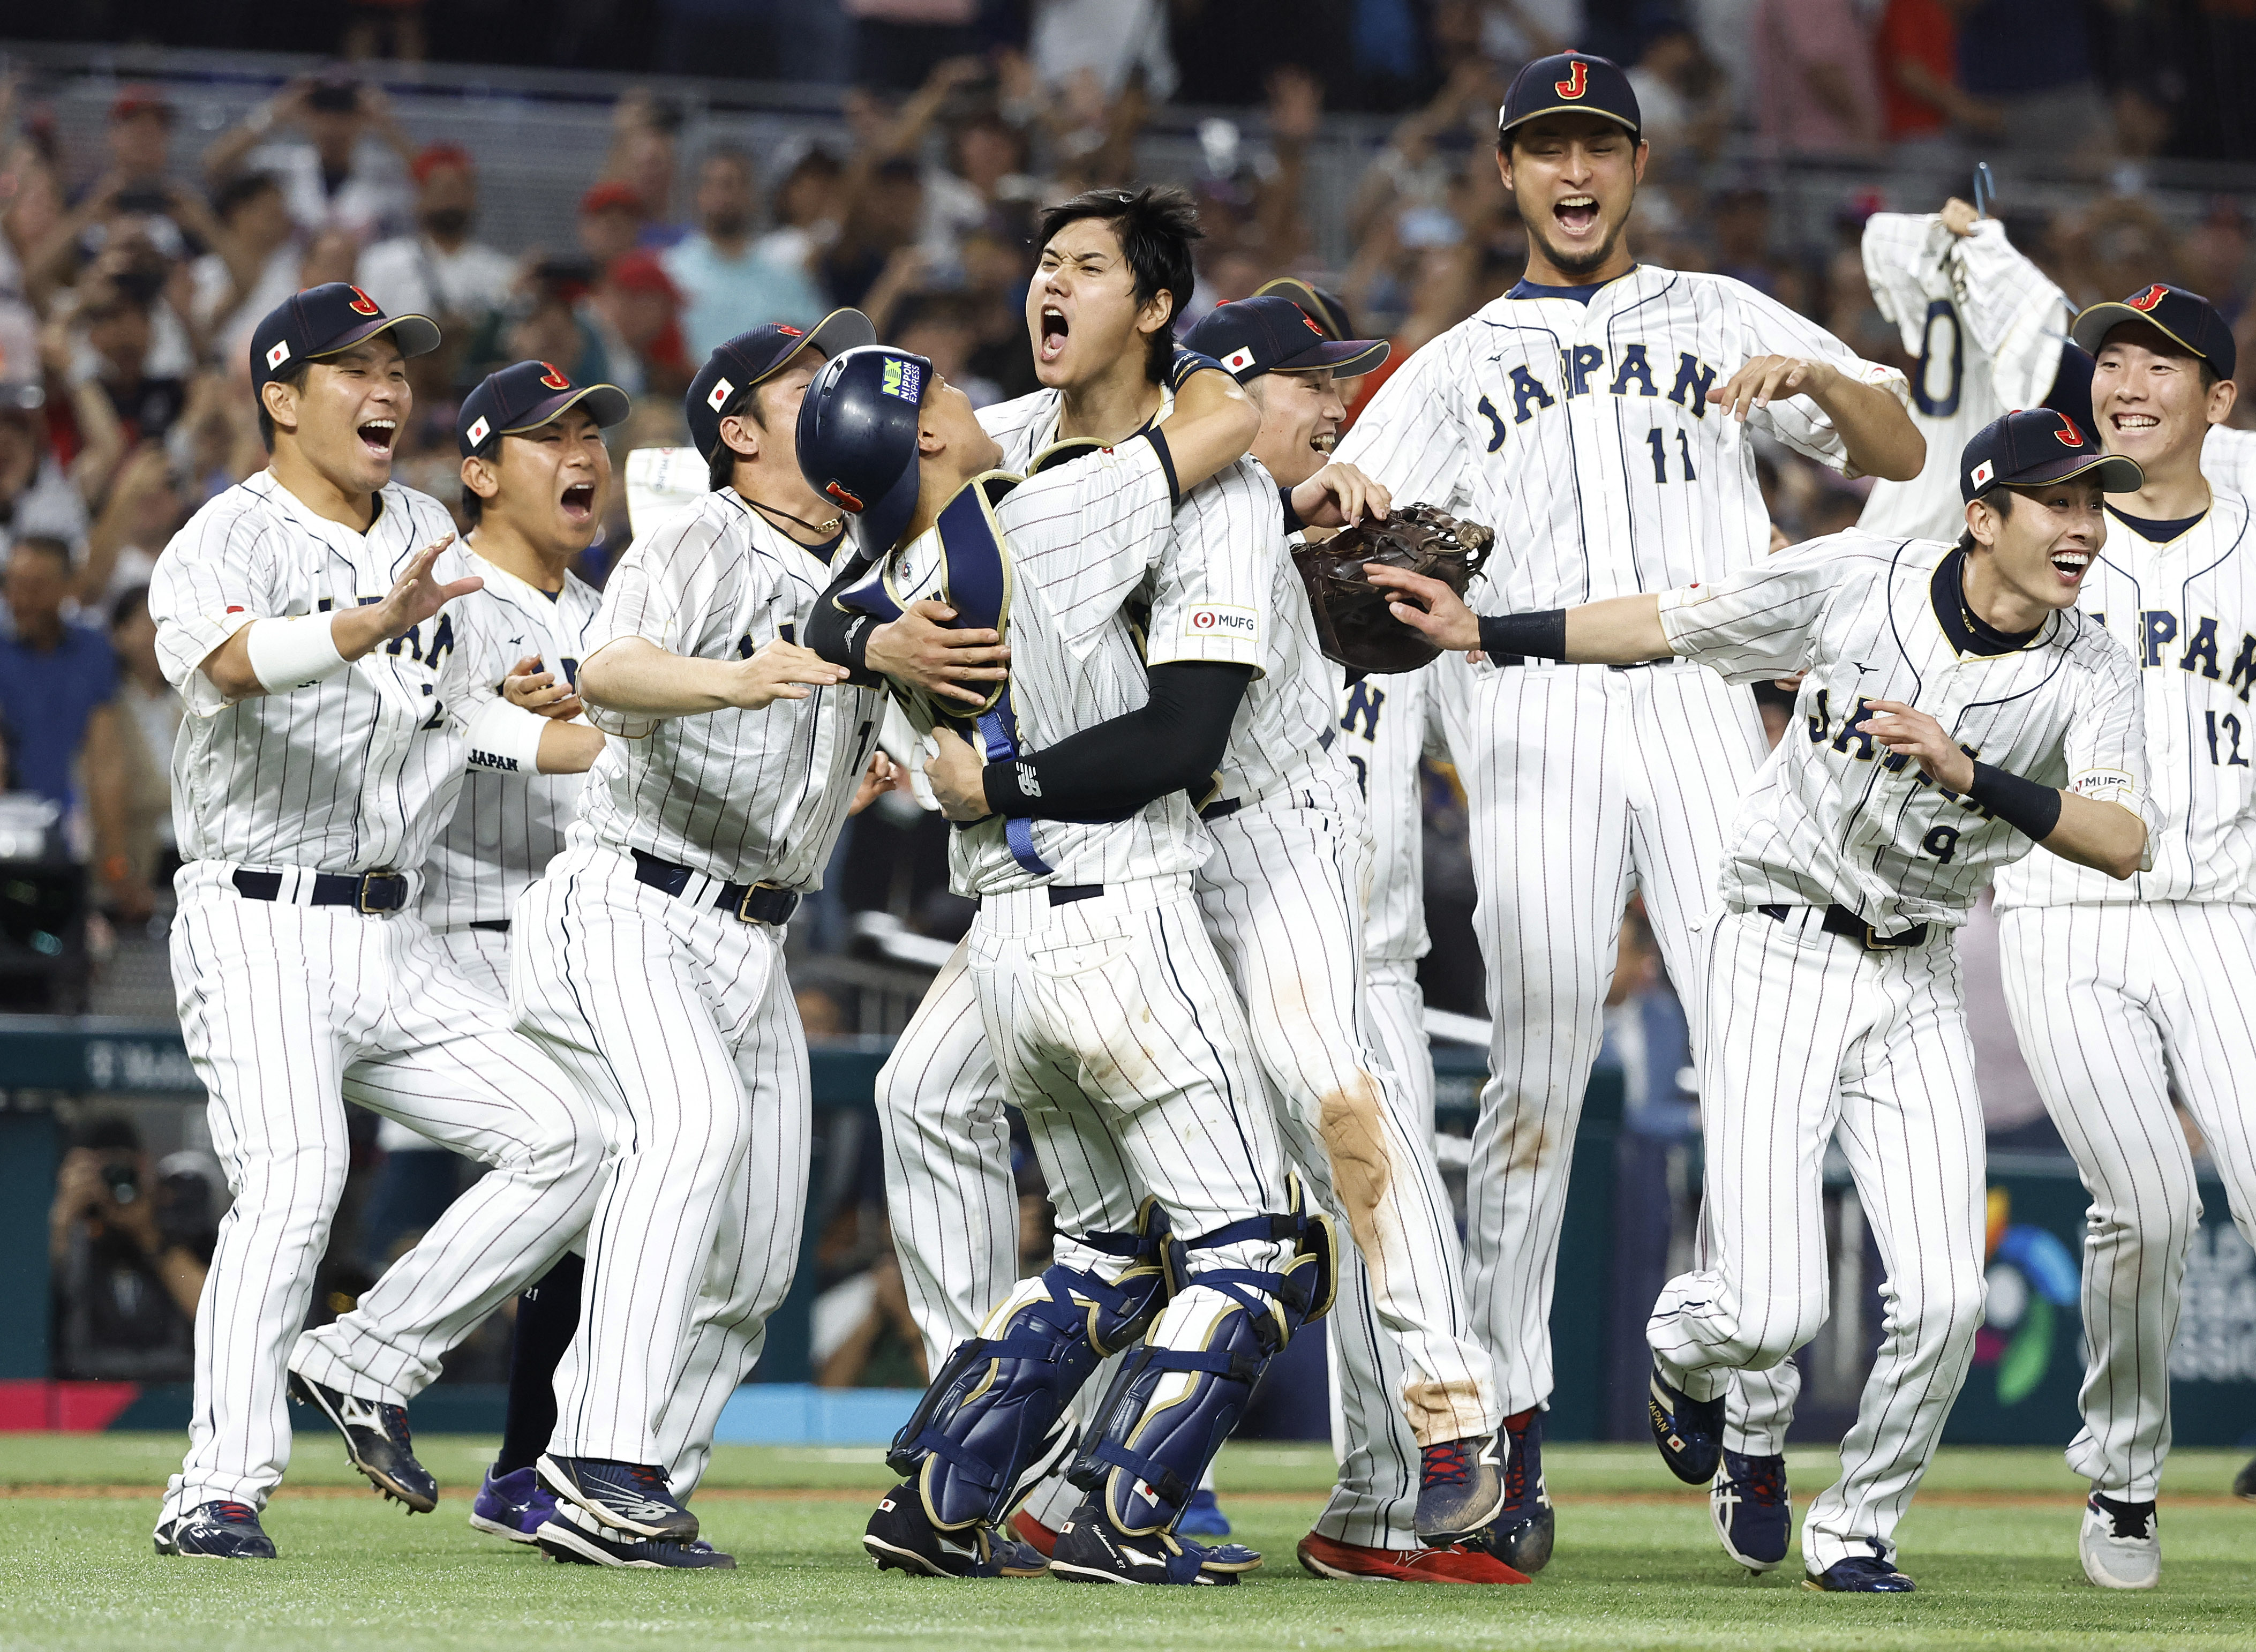 Shohei Ohtani continues his amazing run in MLB: will he get the Triple Crown?  - AS USA